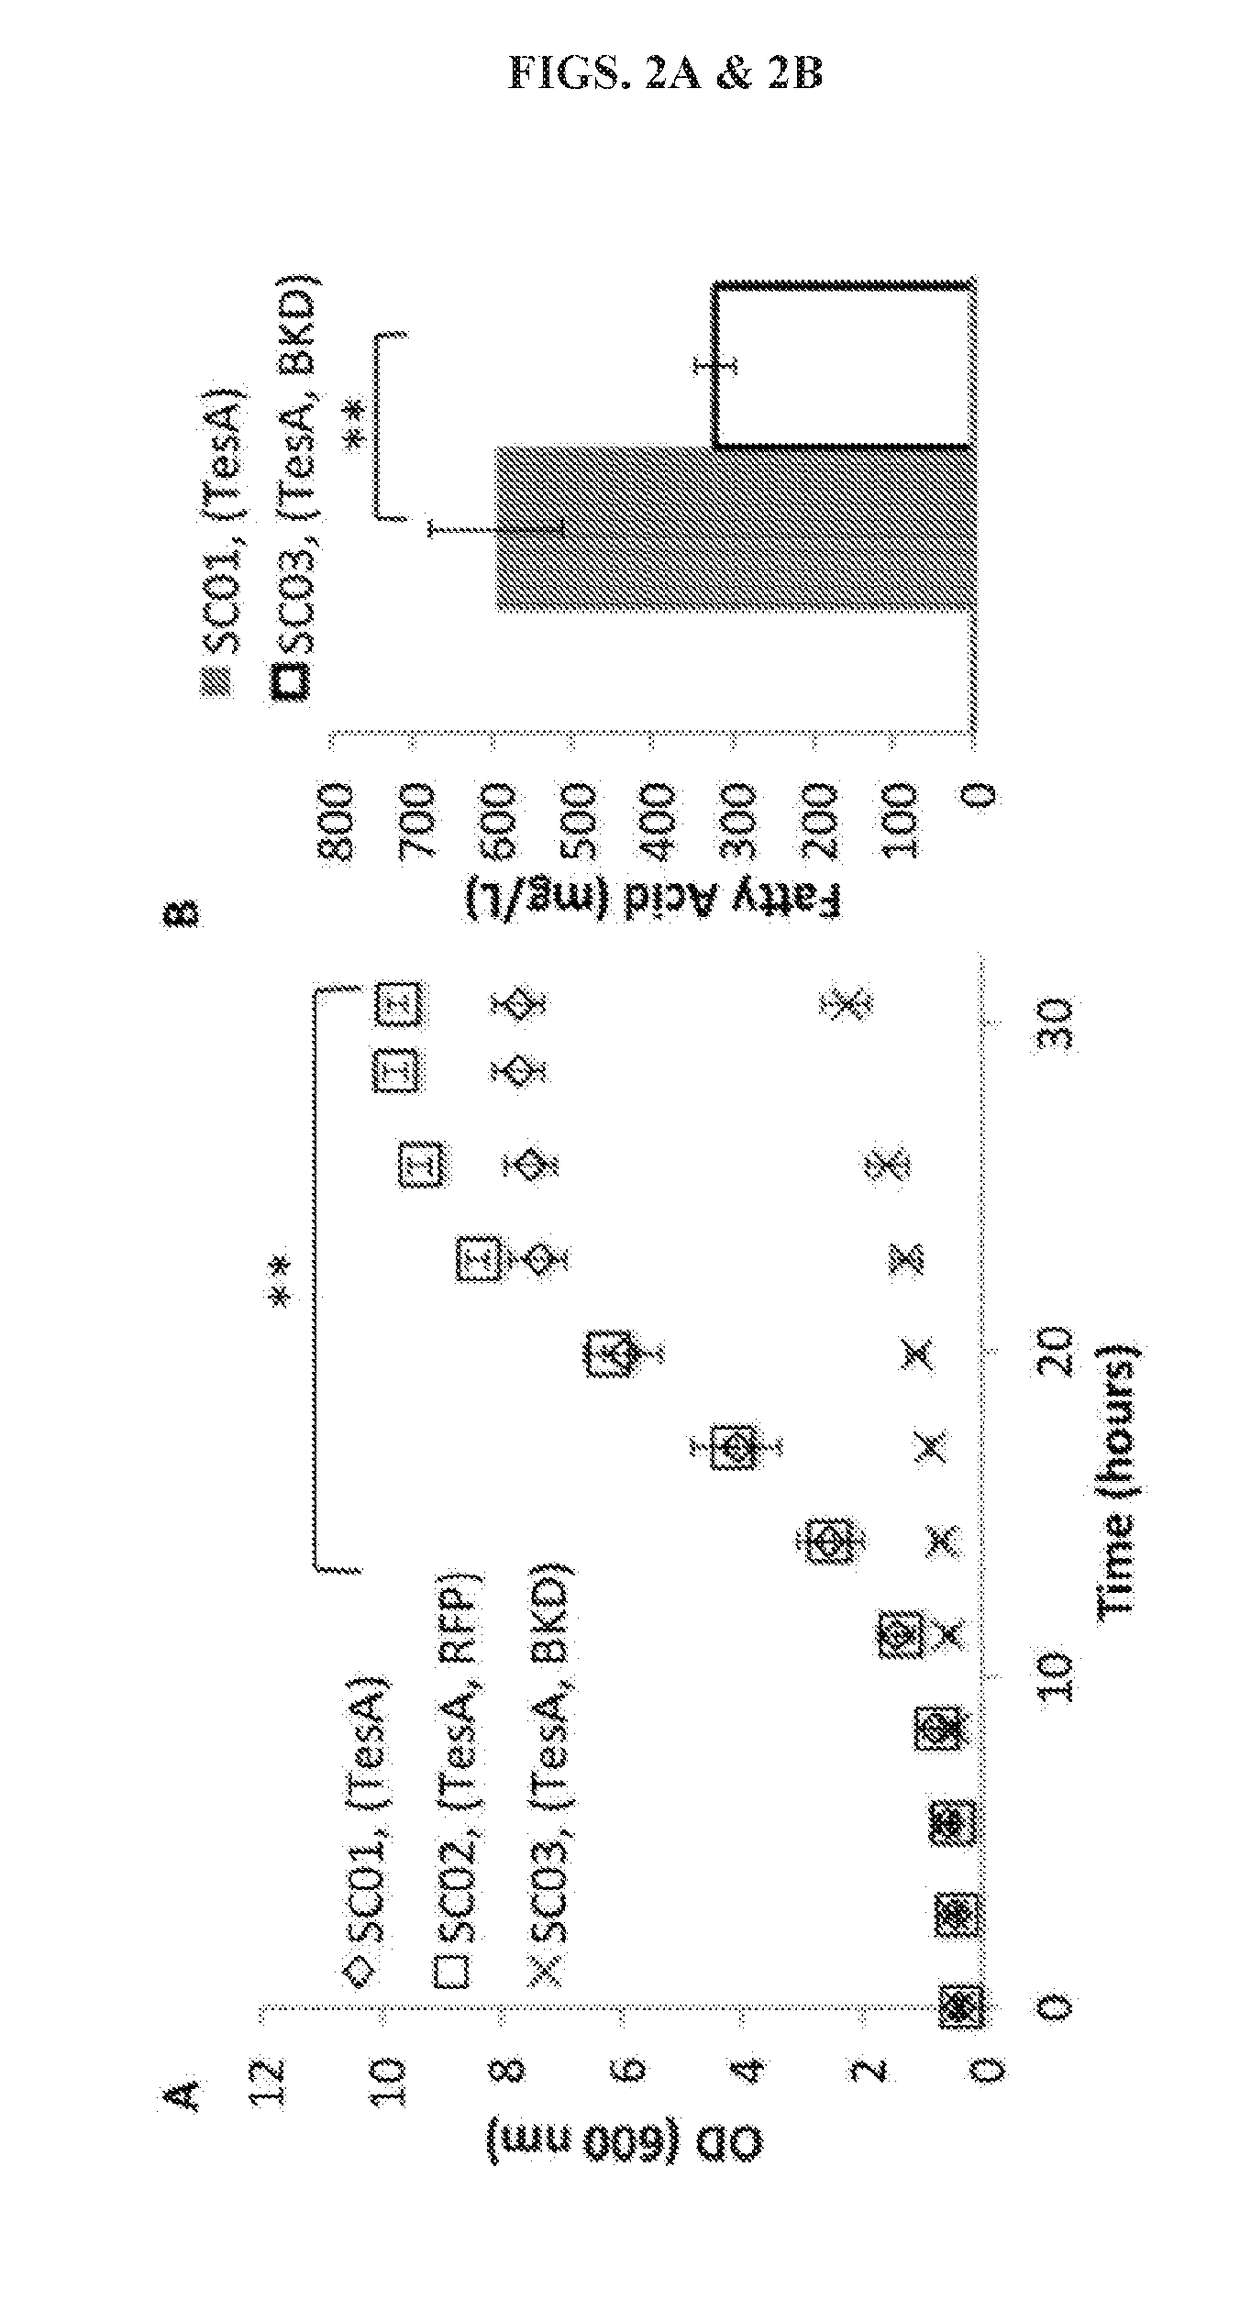 Host cells and methods for producing fatty acid-derivatives with high branched-chain percentage